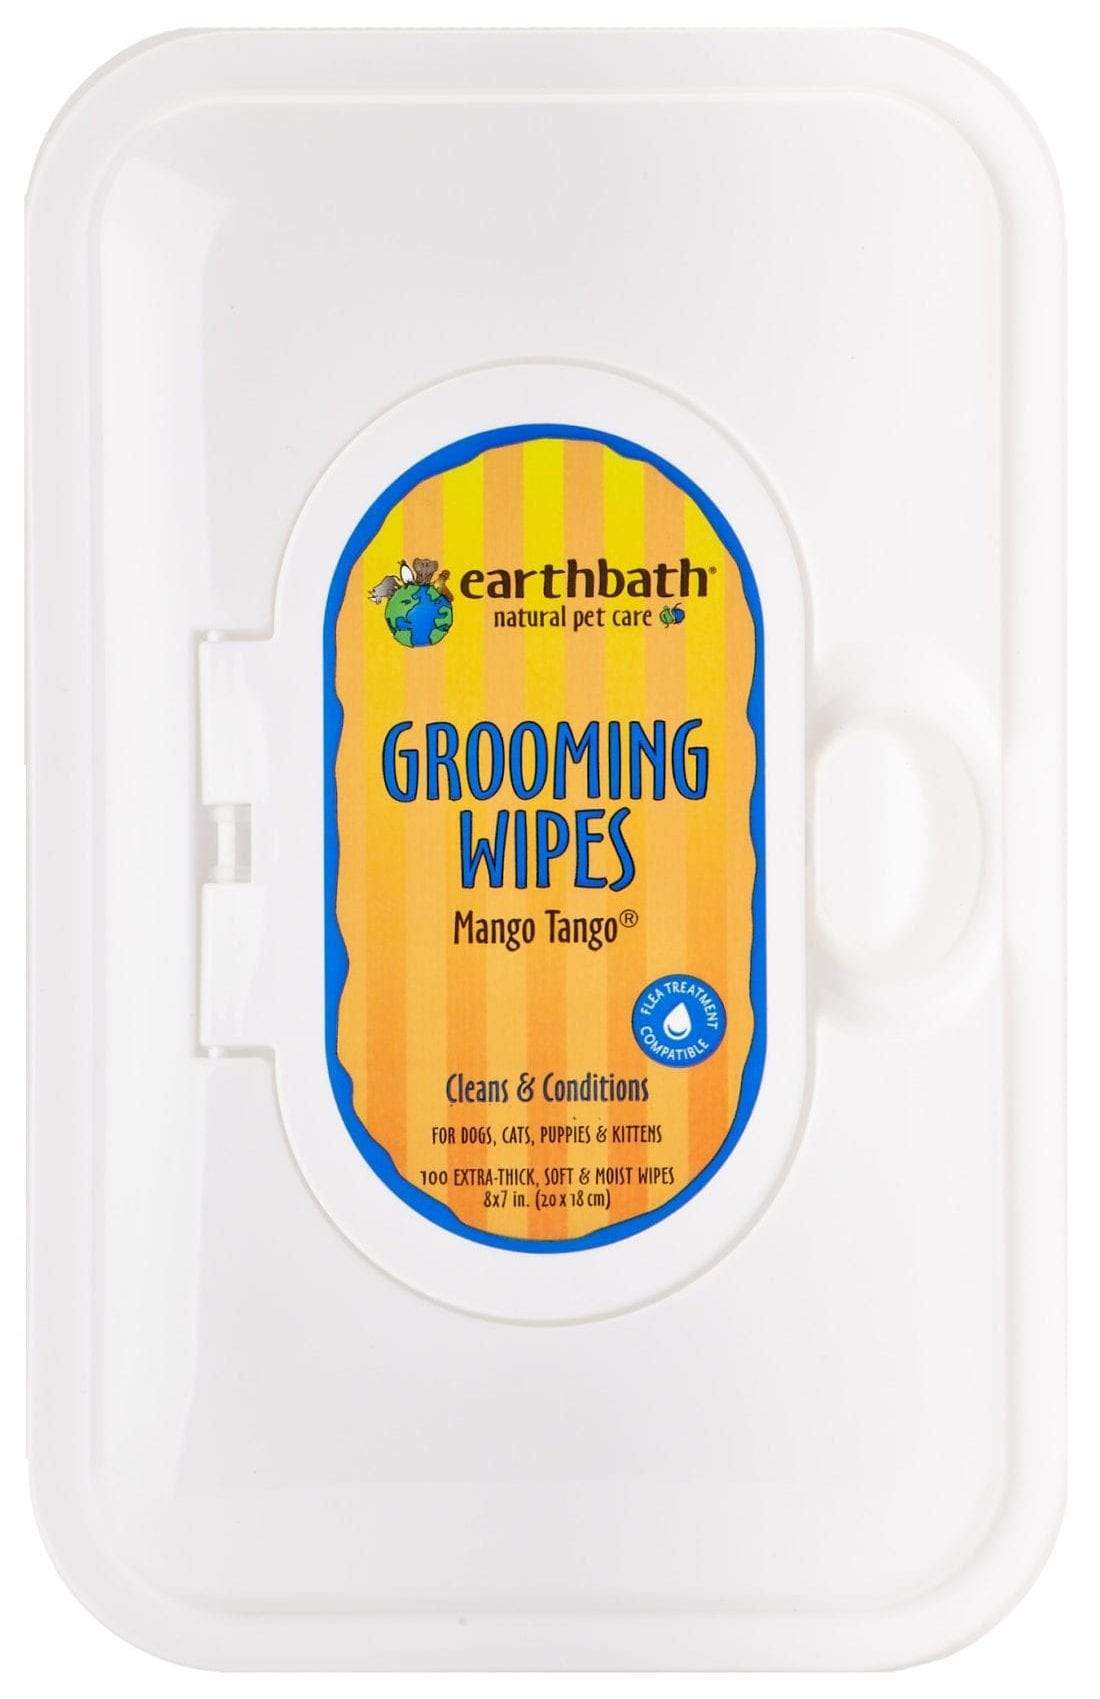 Earthbath Grooming Wipes Mango Tango 100 count-Four Muddy Paws